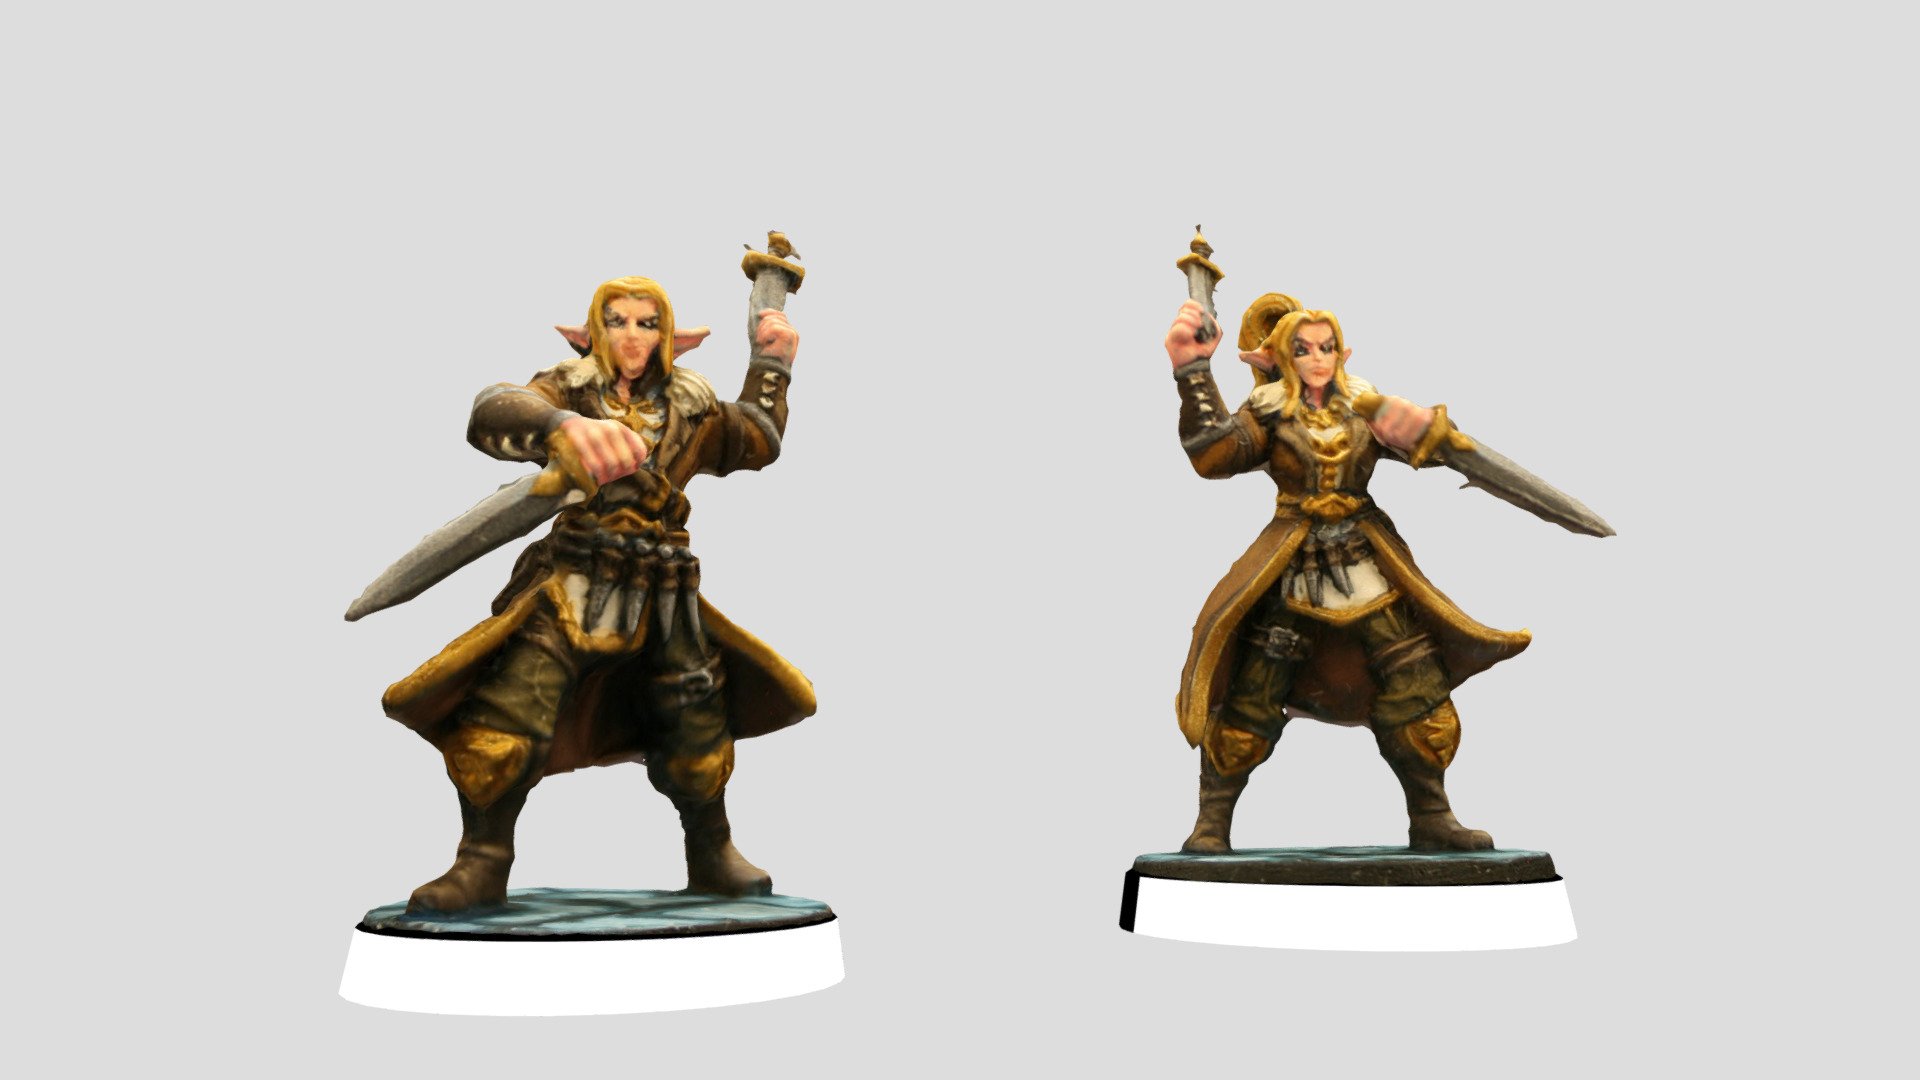 A nimble sized and skilled skirmisher, deadly with small blades. Indepenant, but loyal to the monarch. A reluctant hero.

The male and female roques are available on Tabletop Simulator for all my Patreon subscripers.
https://www.patreon.com/DukeBlitzein

Painted by:
Pj Townsend
https://www.instagram.com/pjpaintsminis/?igshid=MWM2YjBjM2Q%3D&amp;fbclid=IwAR1s7_P_kgf7rE-EtGGDwuAUD14pe9jEW0KDTPTZ36R6GbvIlu101msqomM - Roque - Female & male - Duke Blitzein - Buy Royalty Free 3D model by Chad "Duke Blitzein" C (@chad_c) 3d model